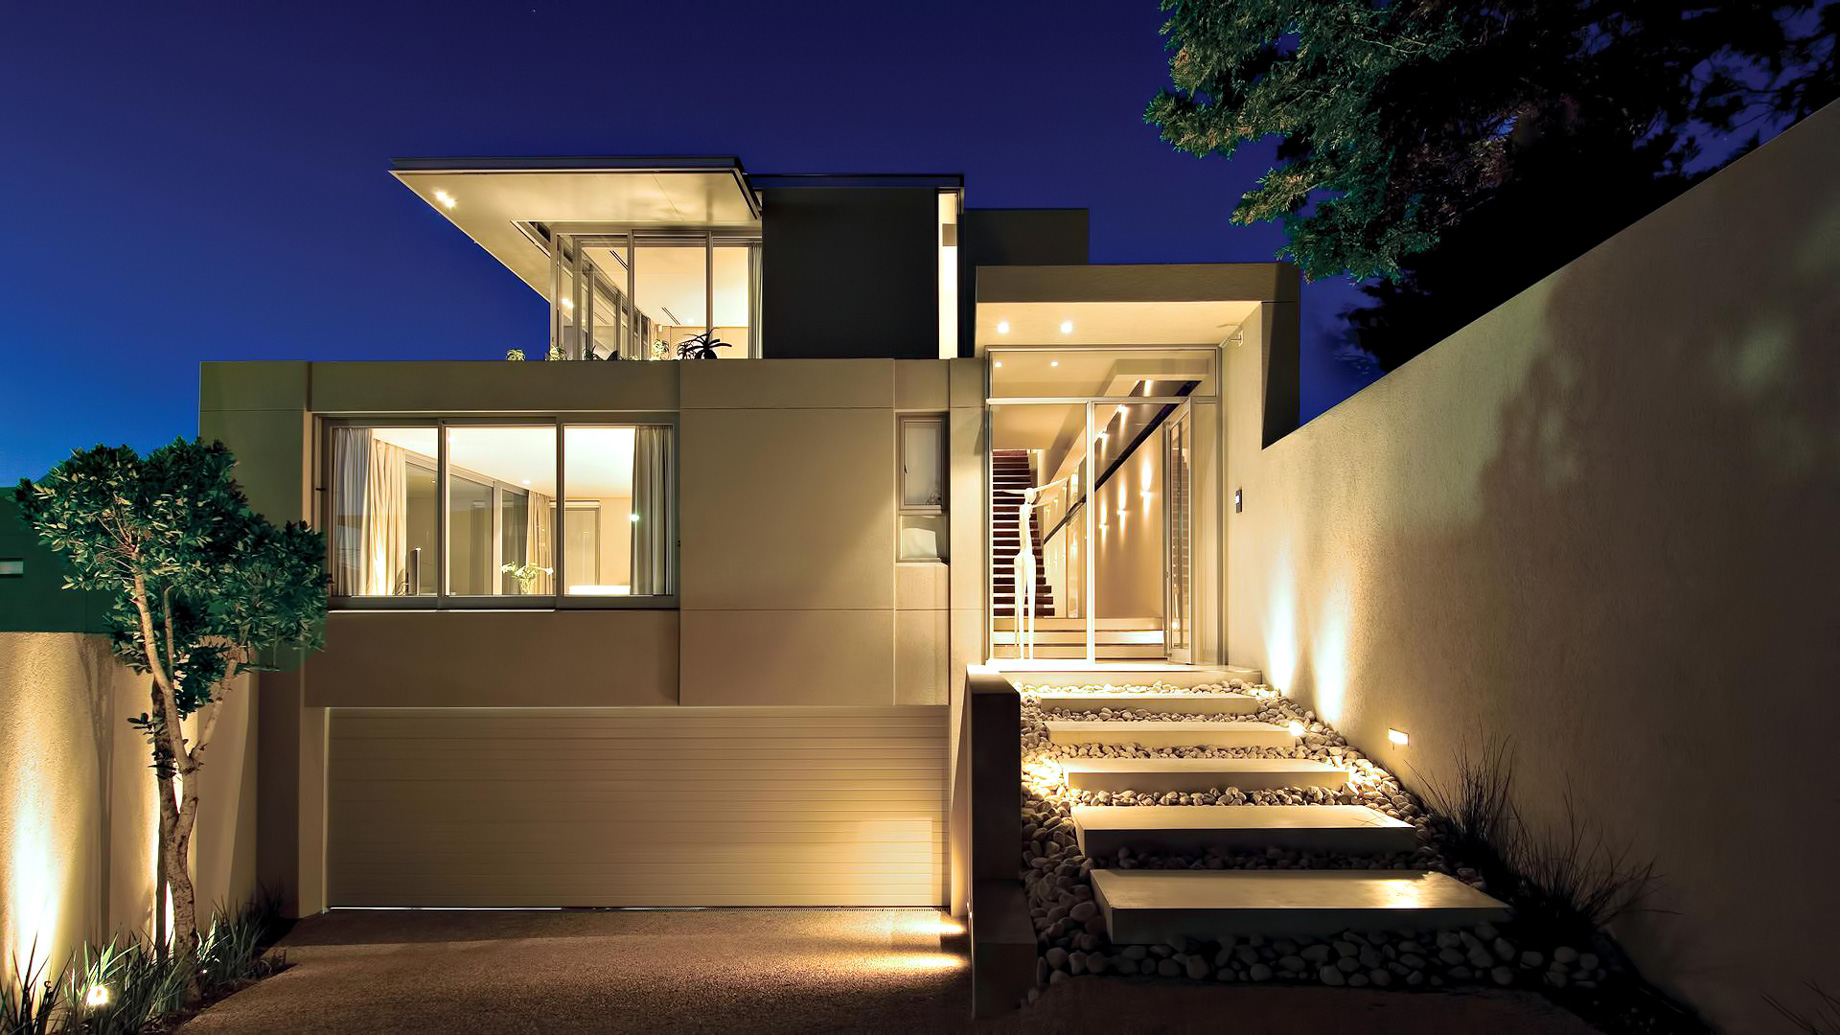 Bond Luxury Villa – 8 First Crescent, Camps Bay, South Africa